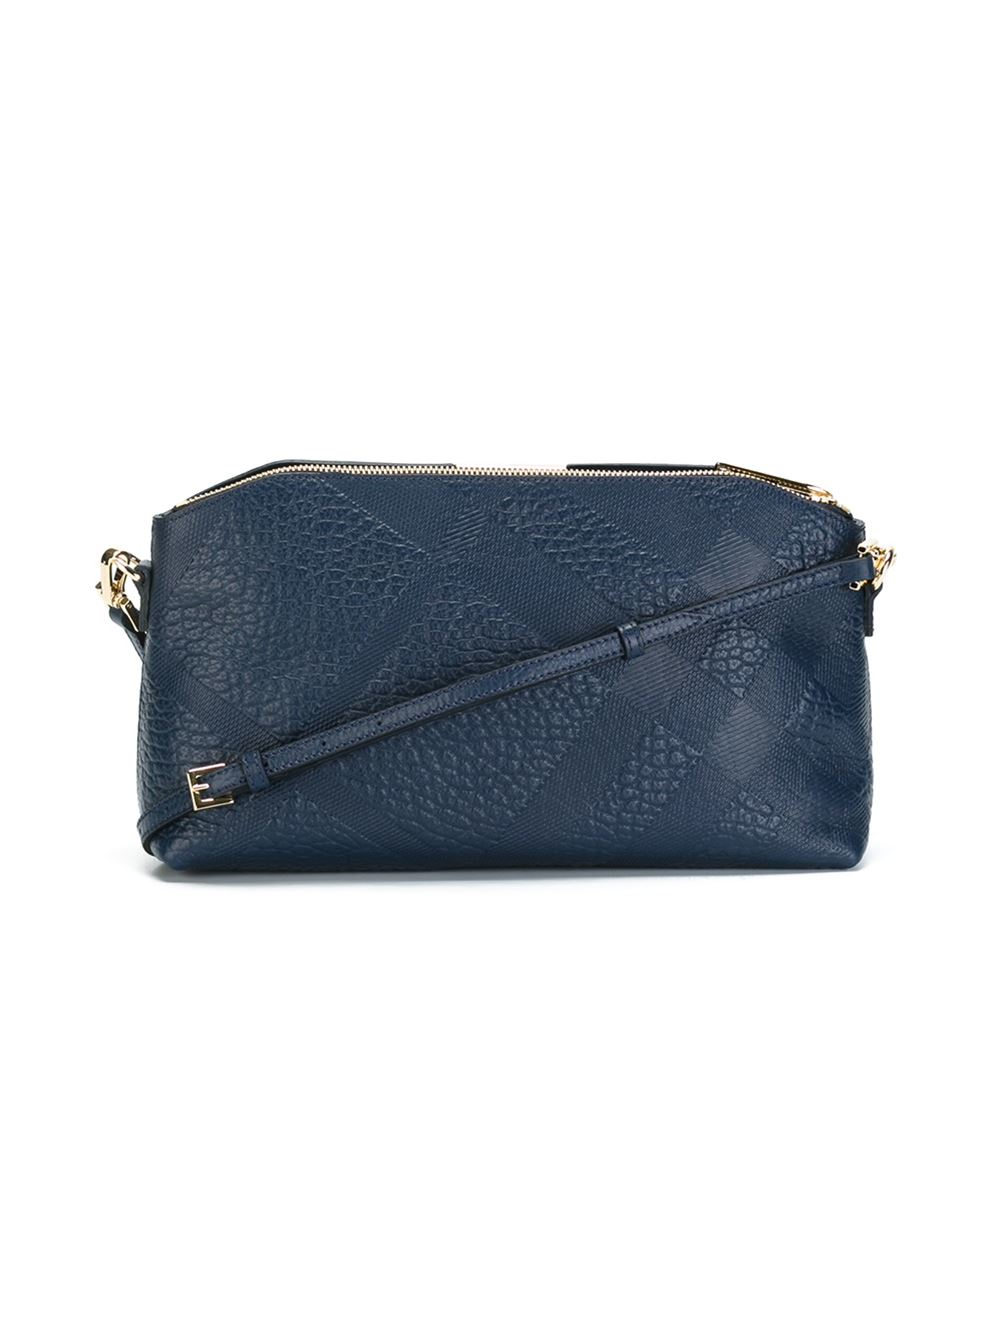 Burberry Embossed Check Crossbody Bag in Blue | Lyst